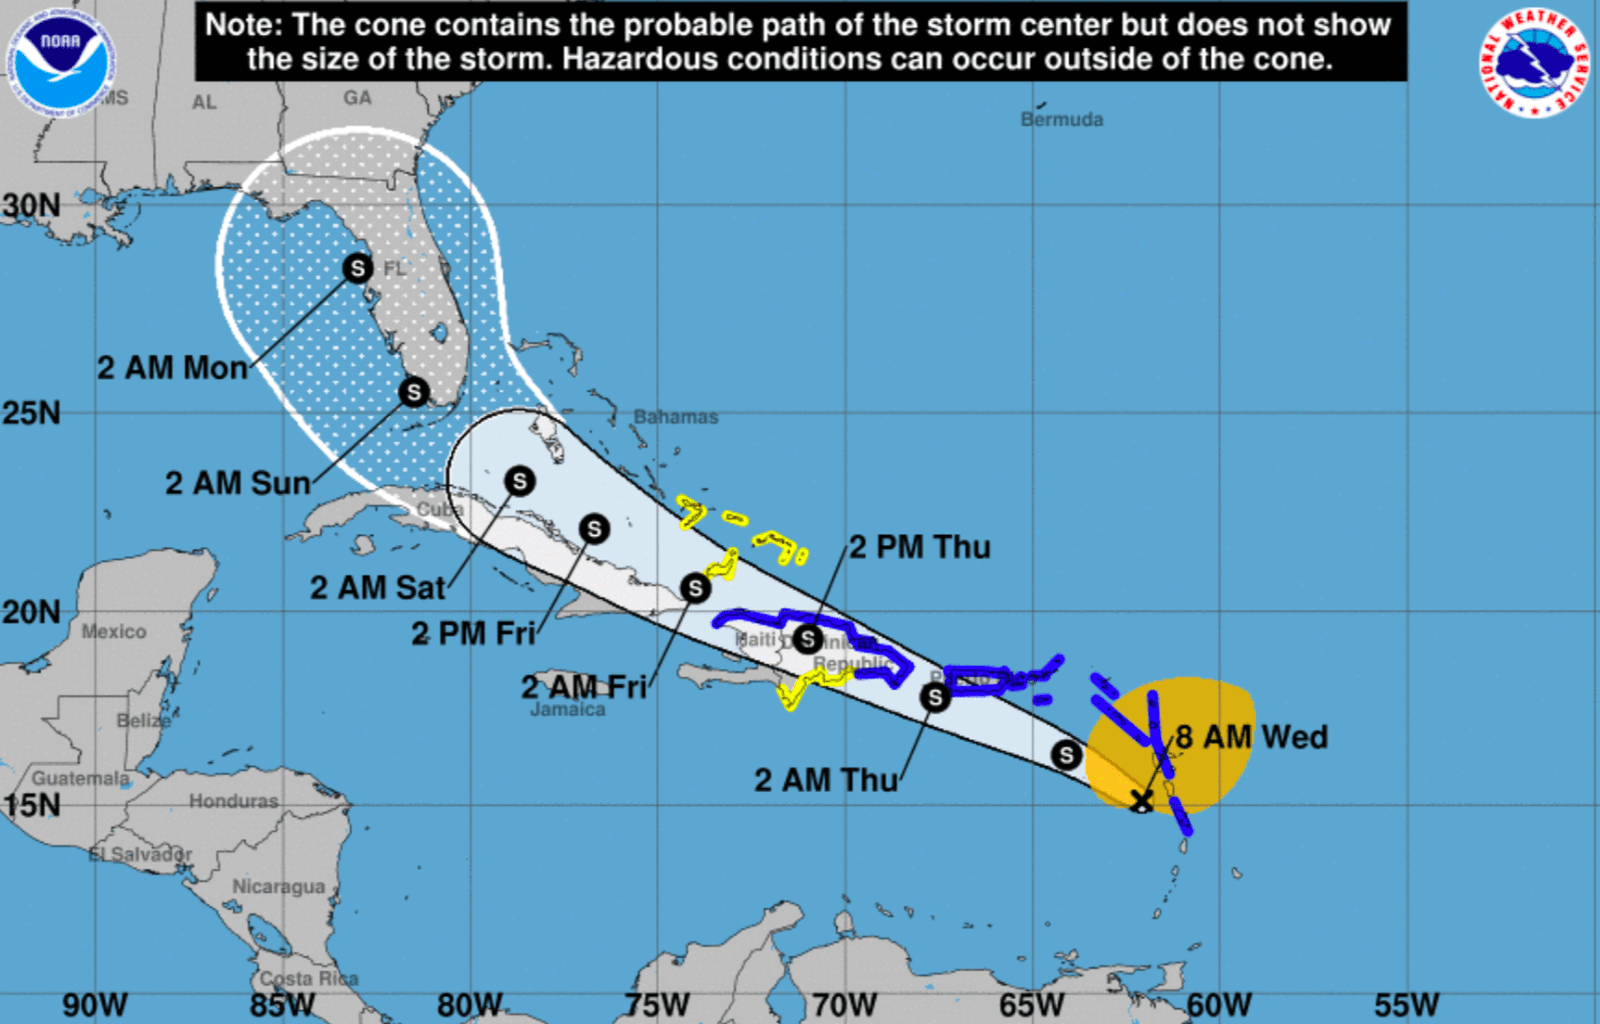 Tropical storm watch issued for southeast Bahamas Eye Witness News